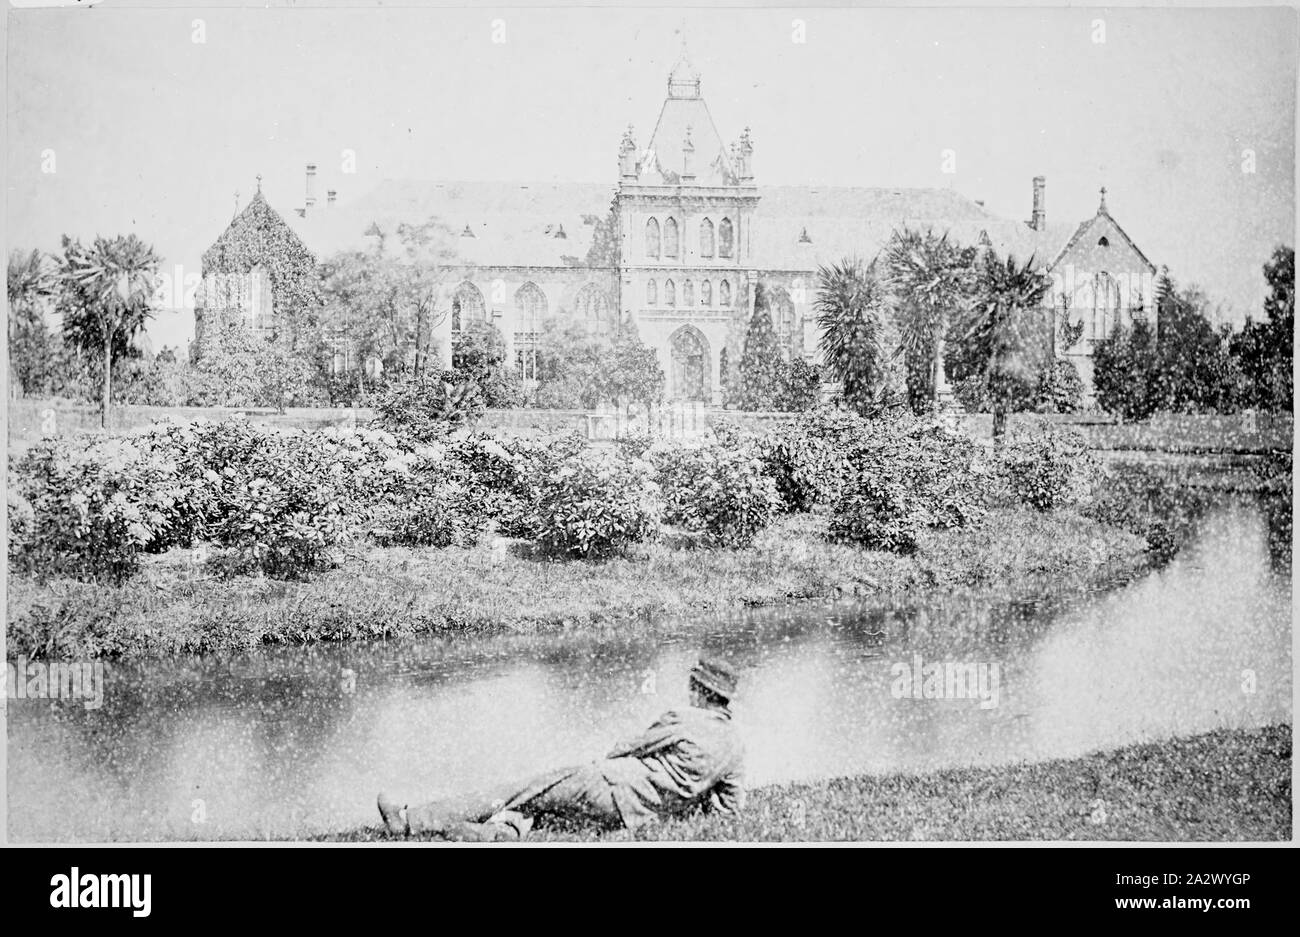 Negative - Melbourne, Victoria, circa 1885, The National Museum, established in the grounds of Melbourne University in 1862. In the foreground is a man reclining on the banks of a lake Stock Photo